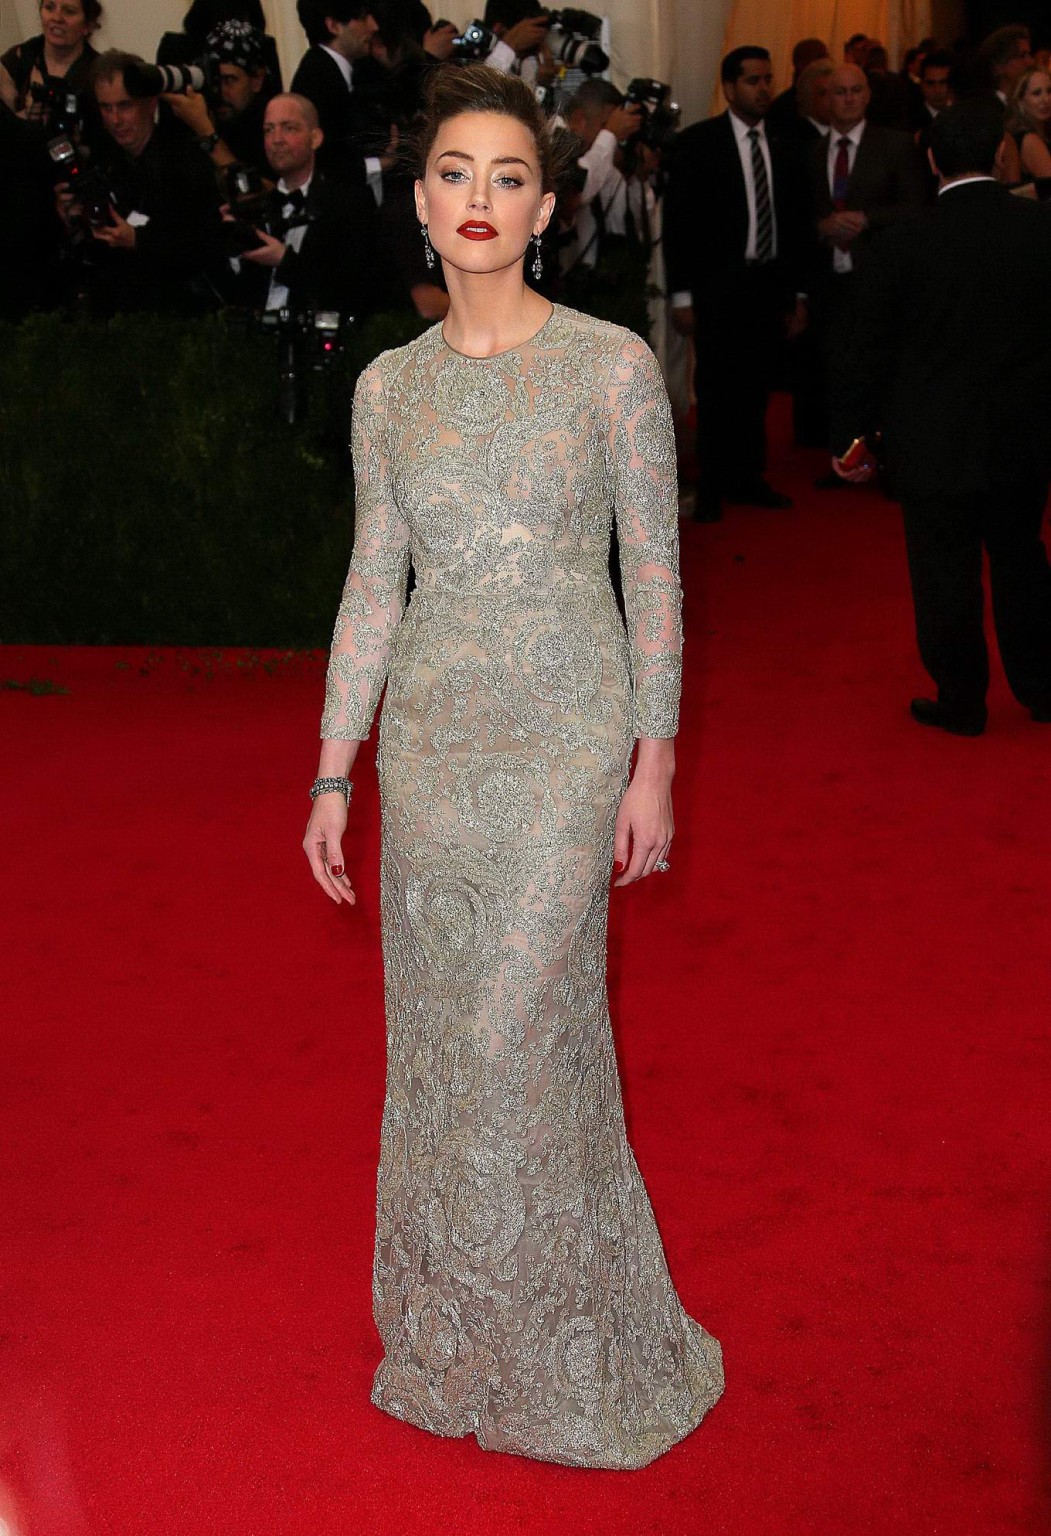 Amber Heard braless wearing a see through dress at the 2014 Met Gala in NY #75197570